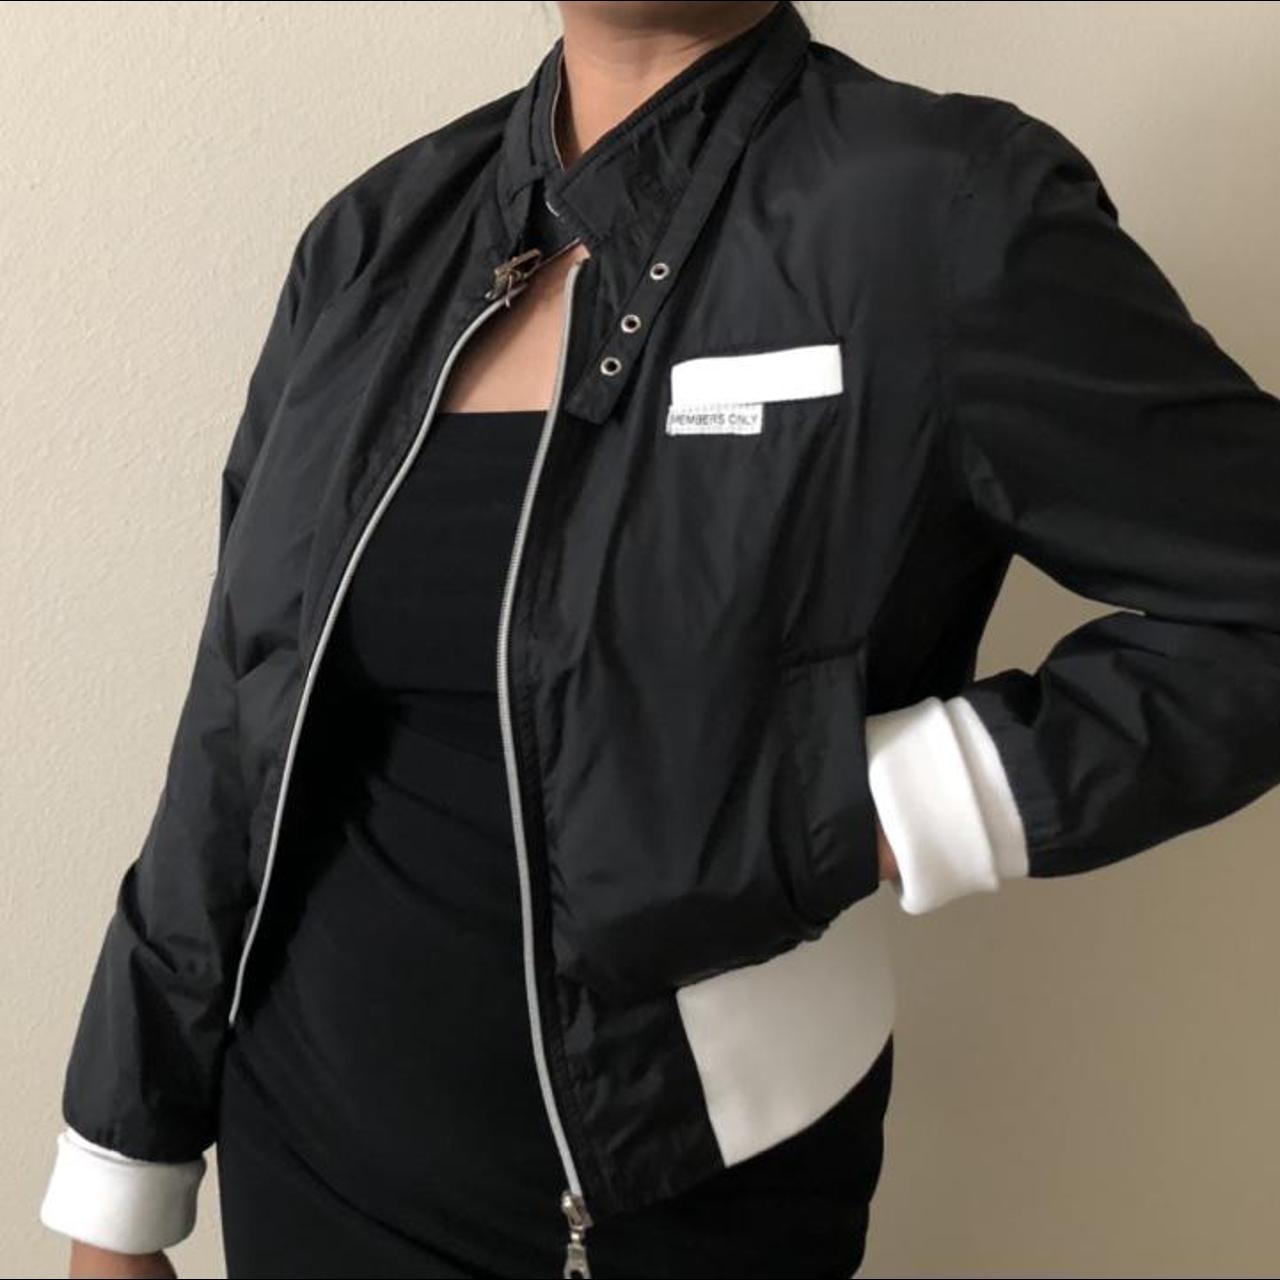 Members Only Women's White and Black Coat